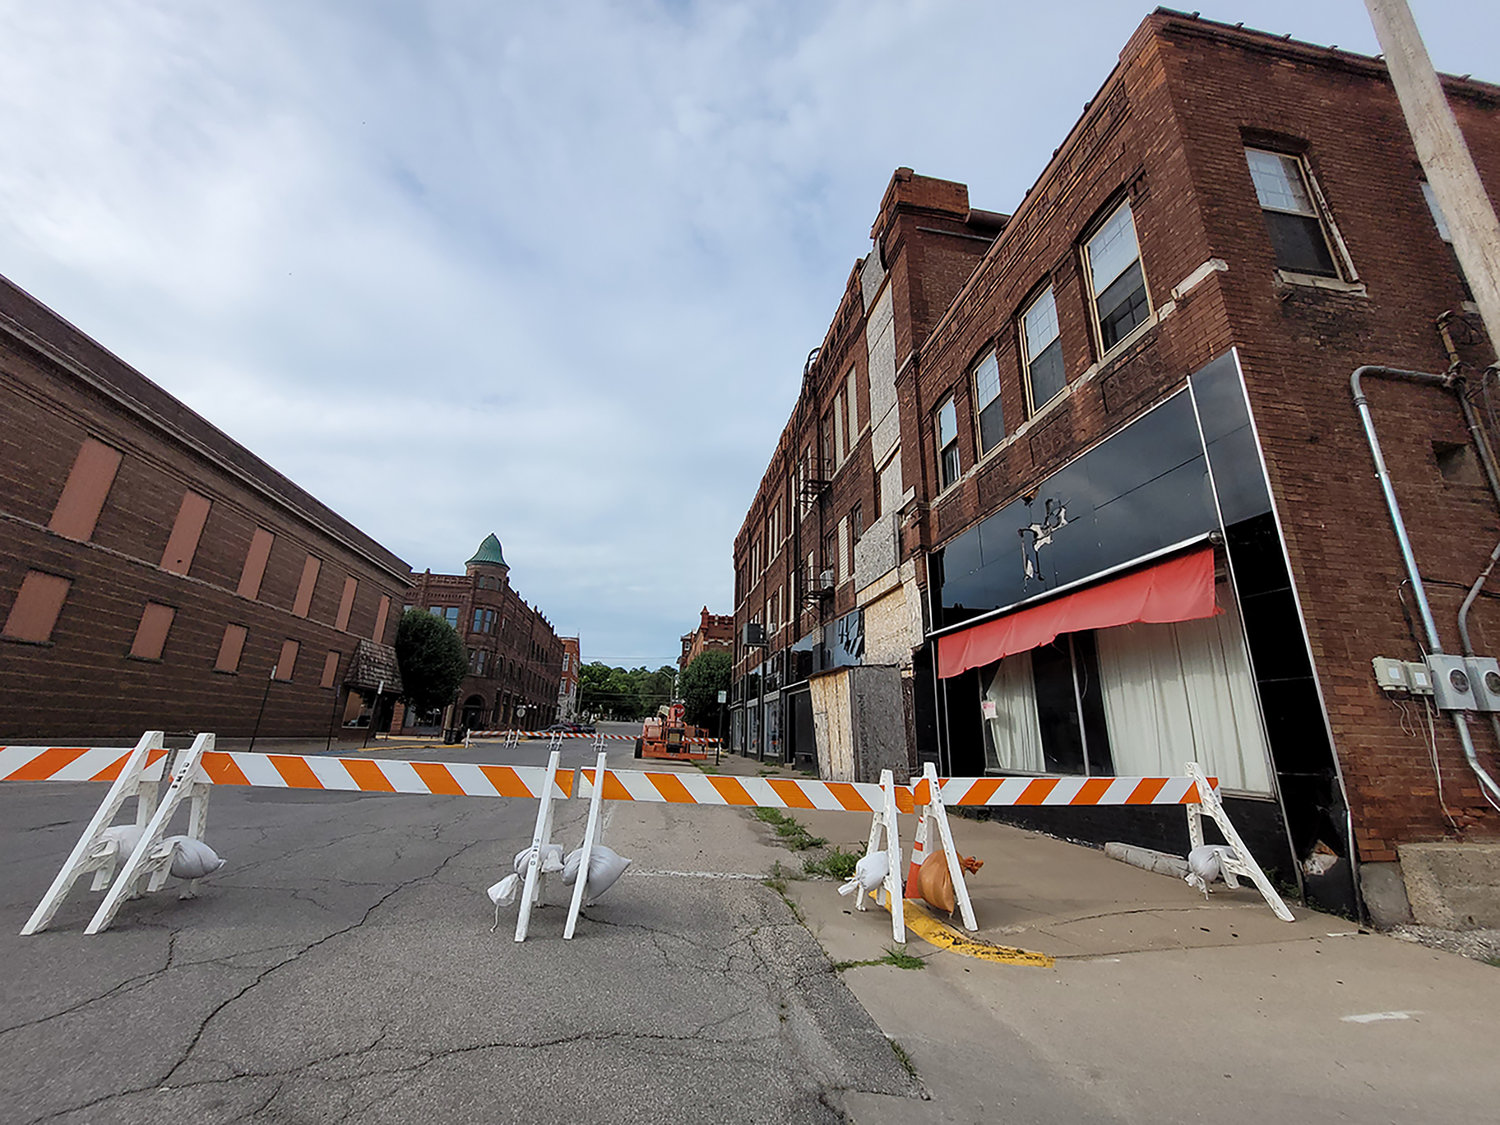 City officials have blocked off all of 8th Street between Avenue G and the alley to the south for fear of further deterioration of the former Humphrey building.